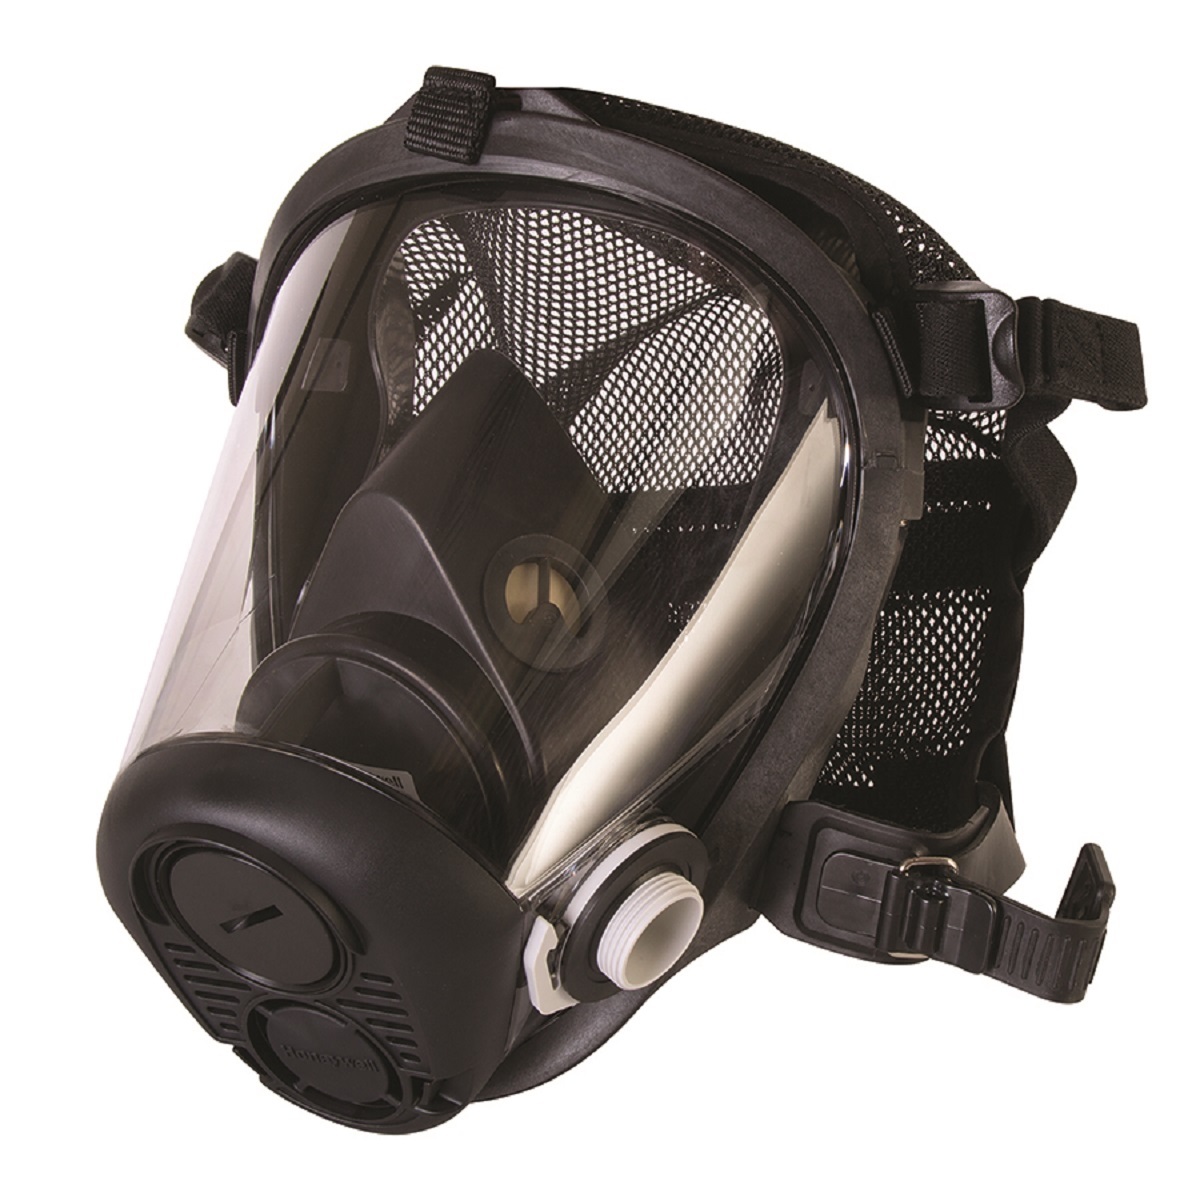 Honeywell Medium RU6500 Series Full Face Silicone Air Purifying Respirator With Mesh Headnet (Availability restrictions apply.)